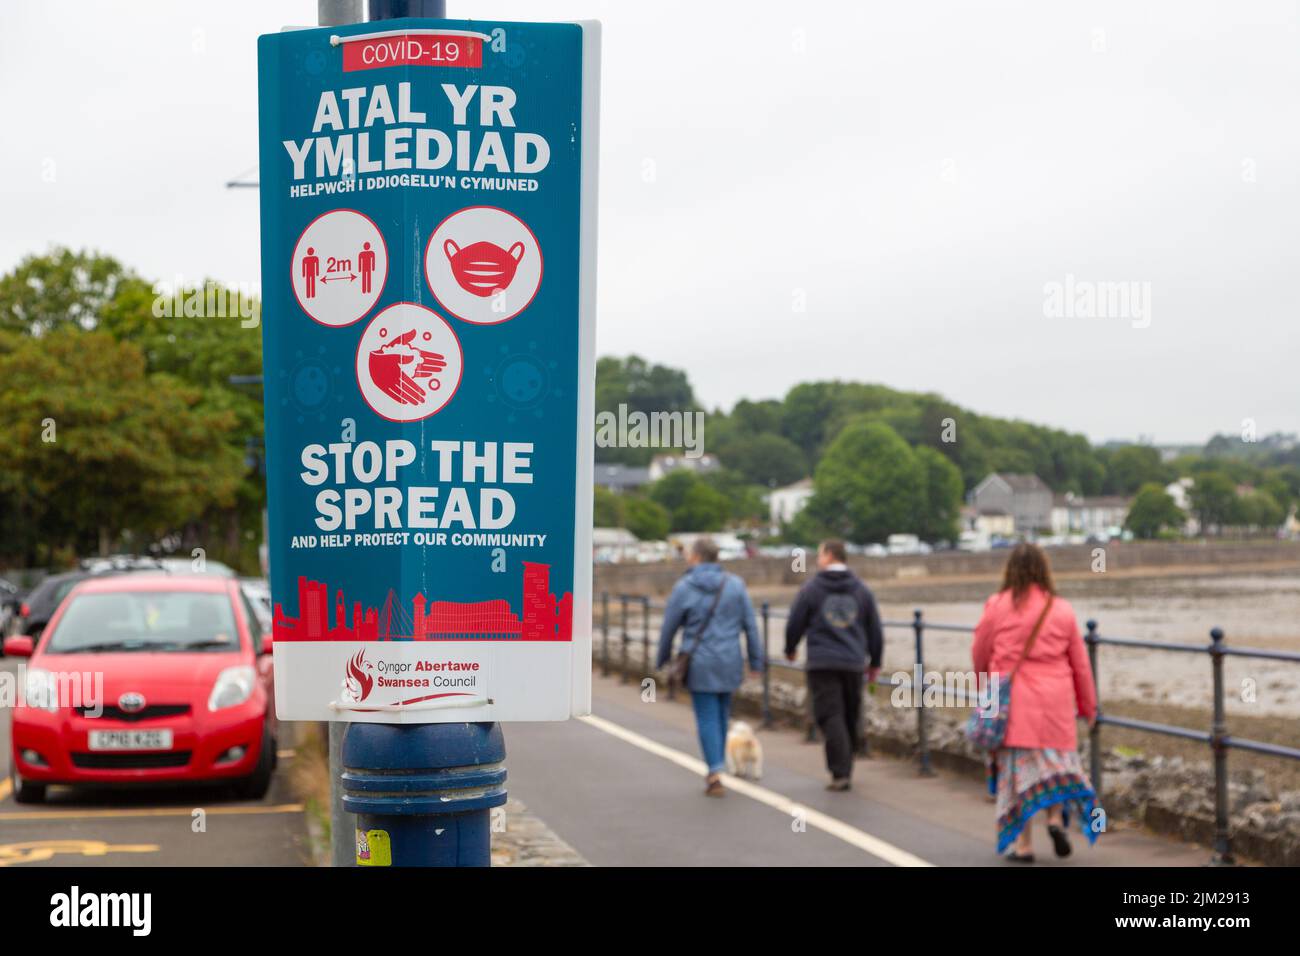 Welsh sign for covid 19, atal yr ymlediad, stop the spread, mumbles, wales Stock Photo